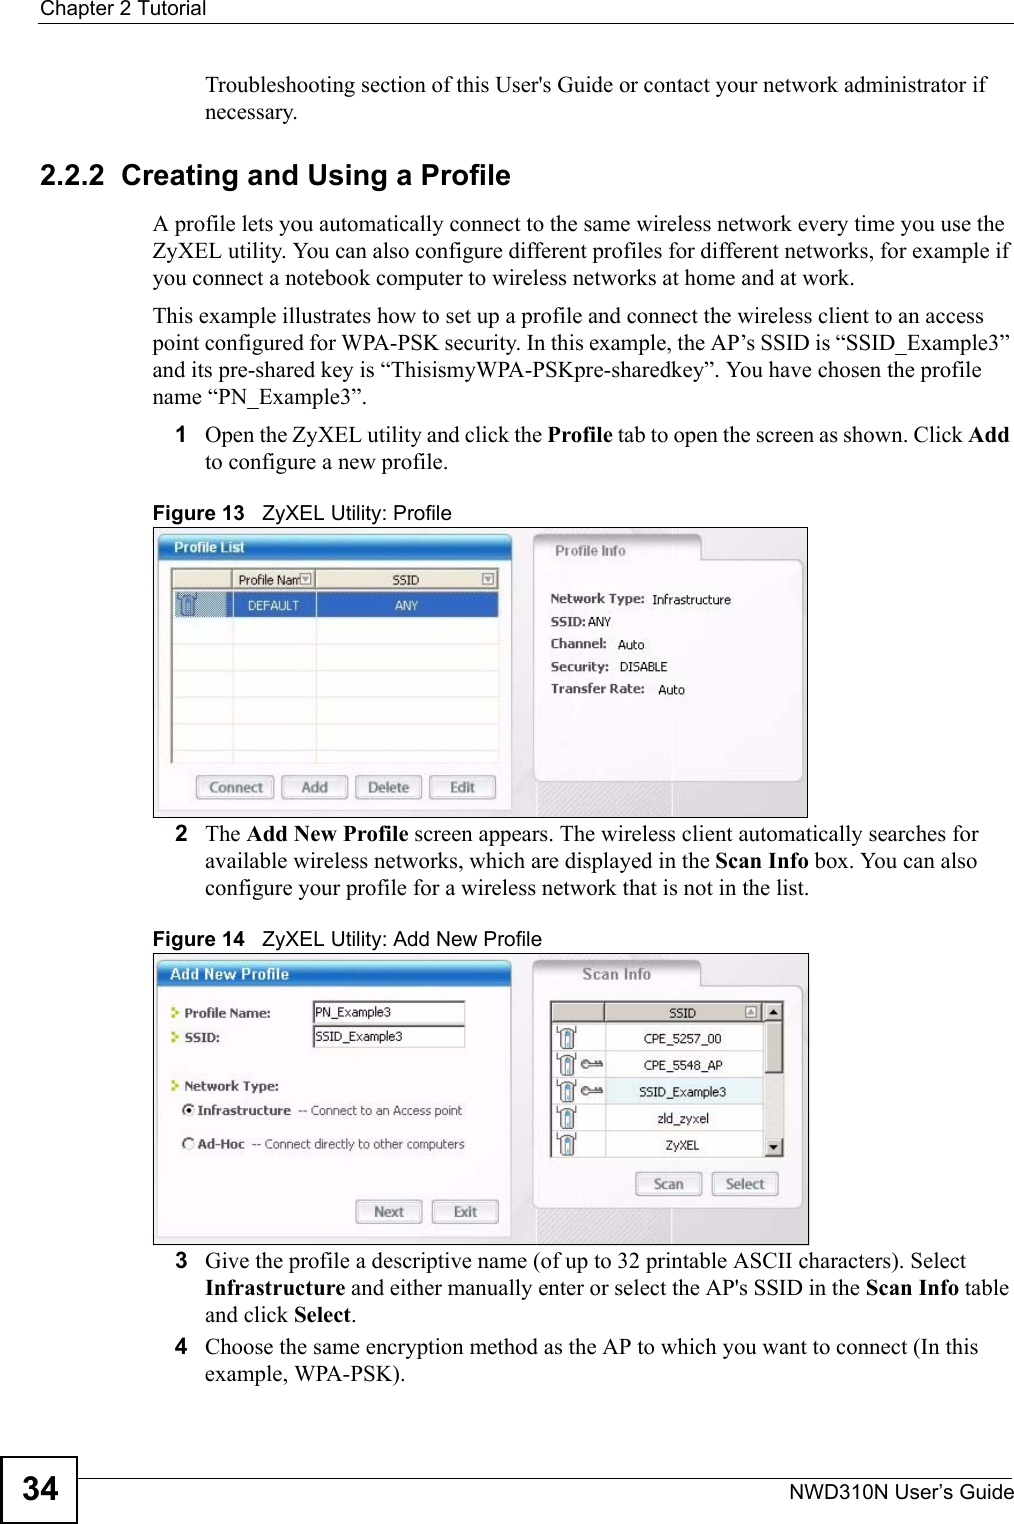 Chapter 2 TutorialNWD310N User’s Guide34Troubleshooting section of this User&apos;s Guide or contact your network administrator if necessary.2.2.2  Creating and Using a ProfileA profile lets you automatically connect to the same wireless network every time you use the ZyXEL utility. You can also configure different profiles for different networks, for example if you connect a notebook computer to wireless networks at home and at work.This example illustrates how to set up a profile and connect the wireless client to an access point configured for WPA-PSK security. In this example, the AP’s SSID is “SSID_Example3” and its pre-shared key is “ThisismyWPA-PSKpre-sharedkey”. You have chosen the profile name “PN_Example3”.1Open the ZyXEL utility and click the Profile tab to open the screen as shown. Click Add to configure a new profile.Figure 13   ZyXEL Utility: Profile2The Add New Profile screen appears. The wireless client automatically searches for available wireless networks, which are displayed in the Scan Info box. You can also configure your profile for a wireless network that is not in the list. Figure 14   ZyXEL Utility: Add New Profile3Give the profile a descriptive name (of up to 32 printable ASCII characters). Select Infrastructure and either manually enter or select the AP&apos;s SSID in the Scan Info table and click Select.4Choose the same encryption method as the AP to which you want to connect (In this example, WPA-PSK).